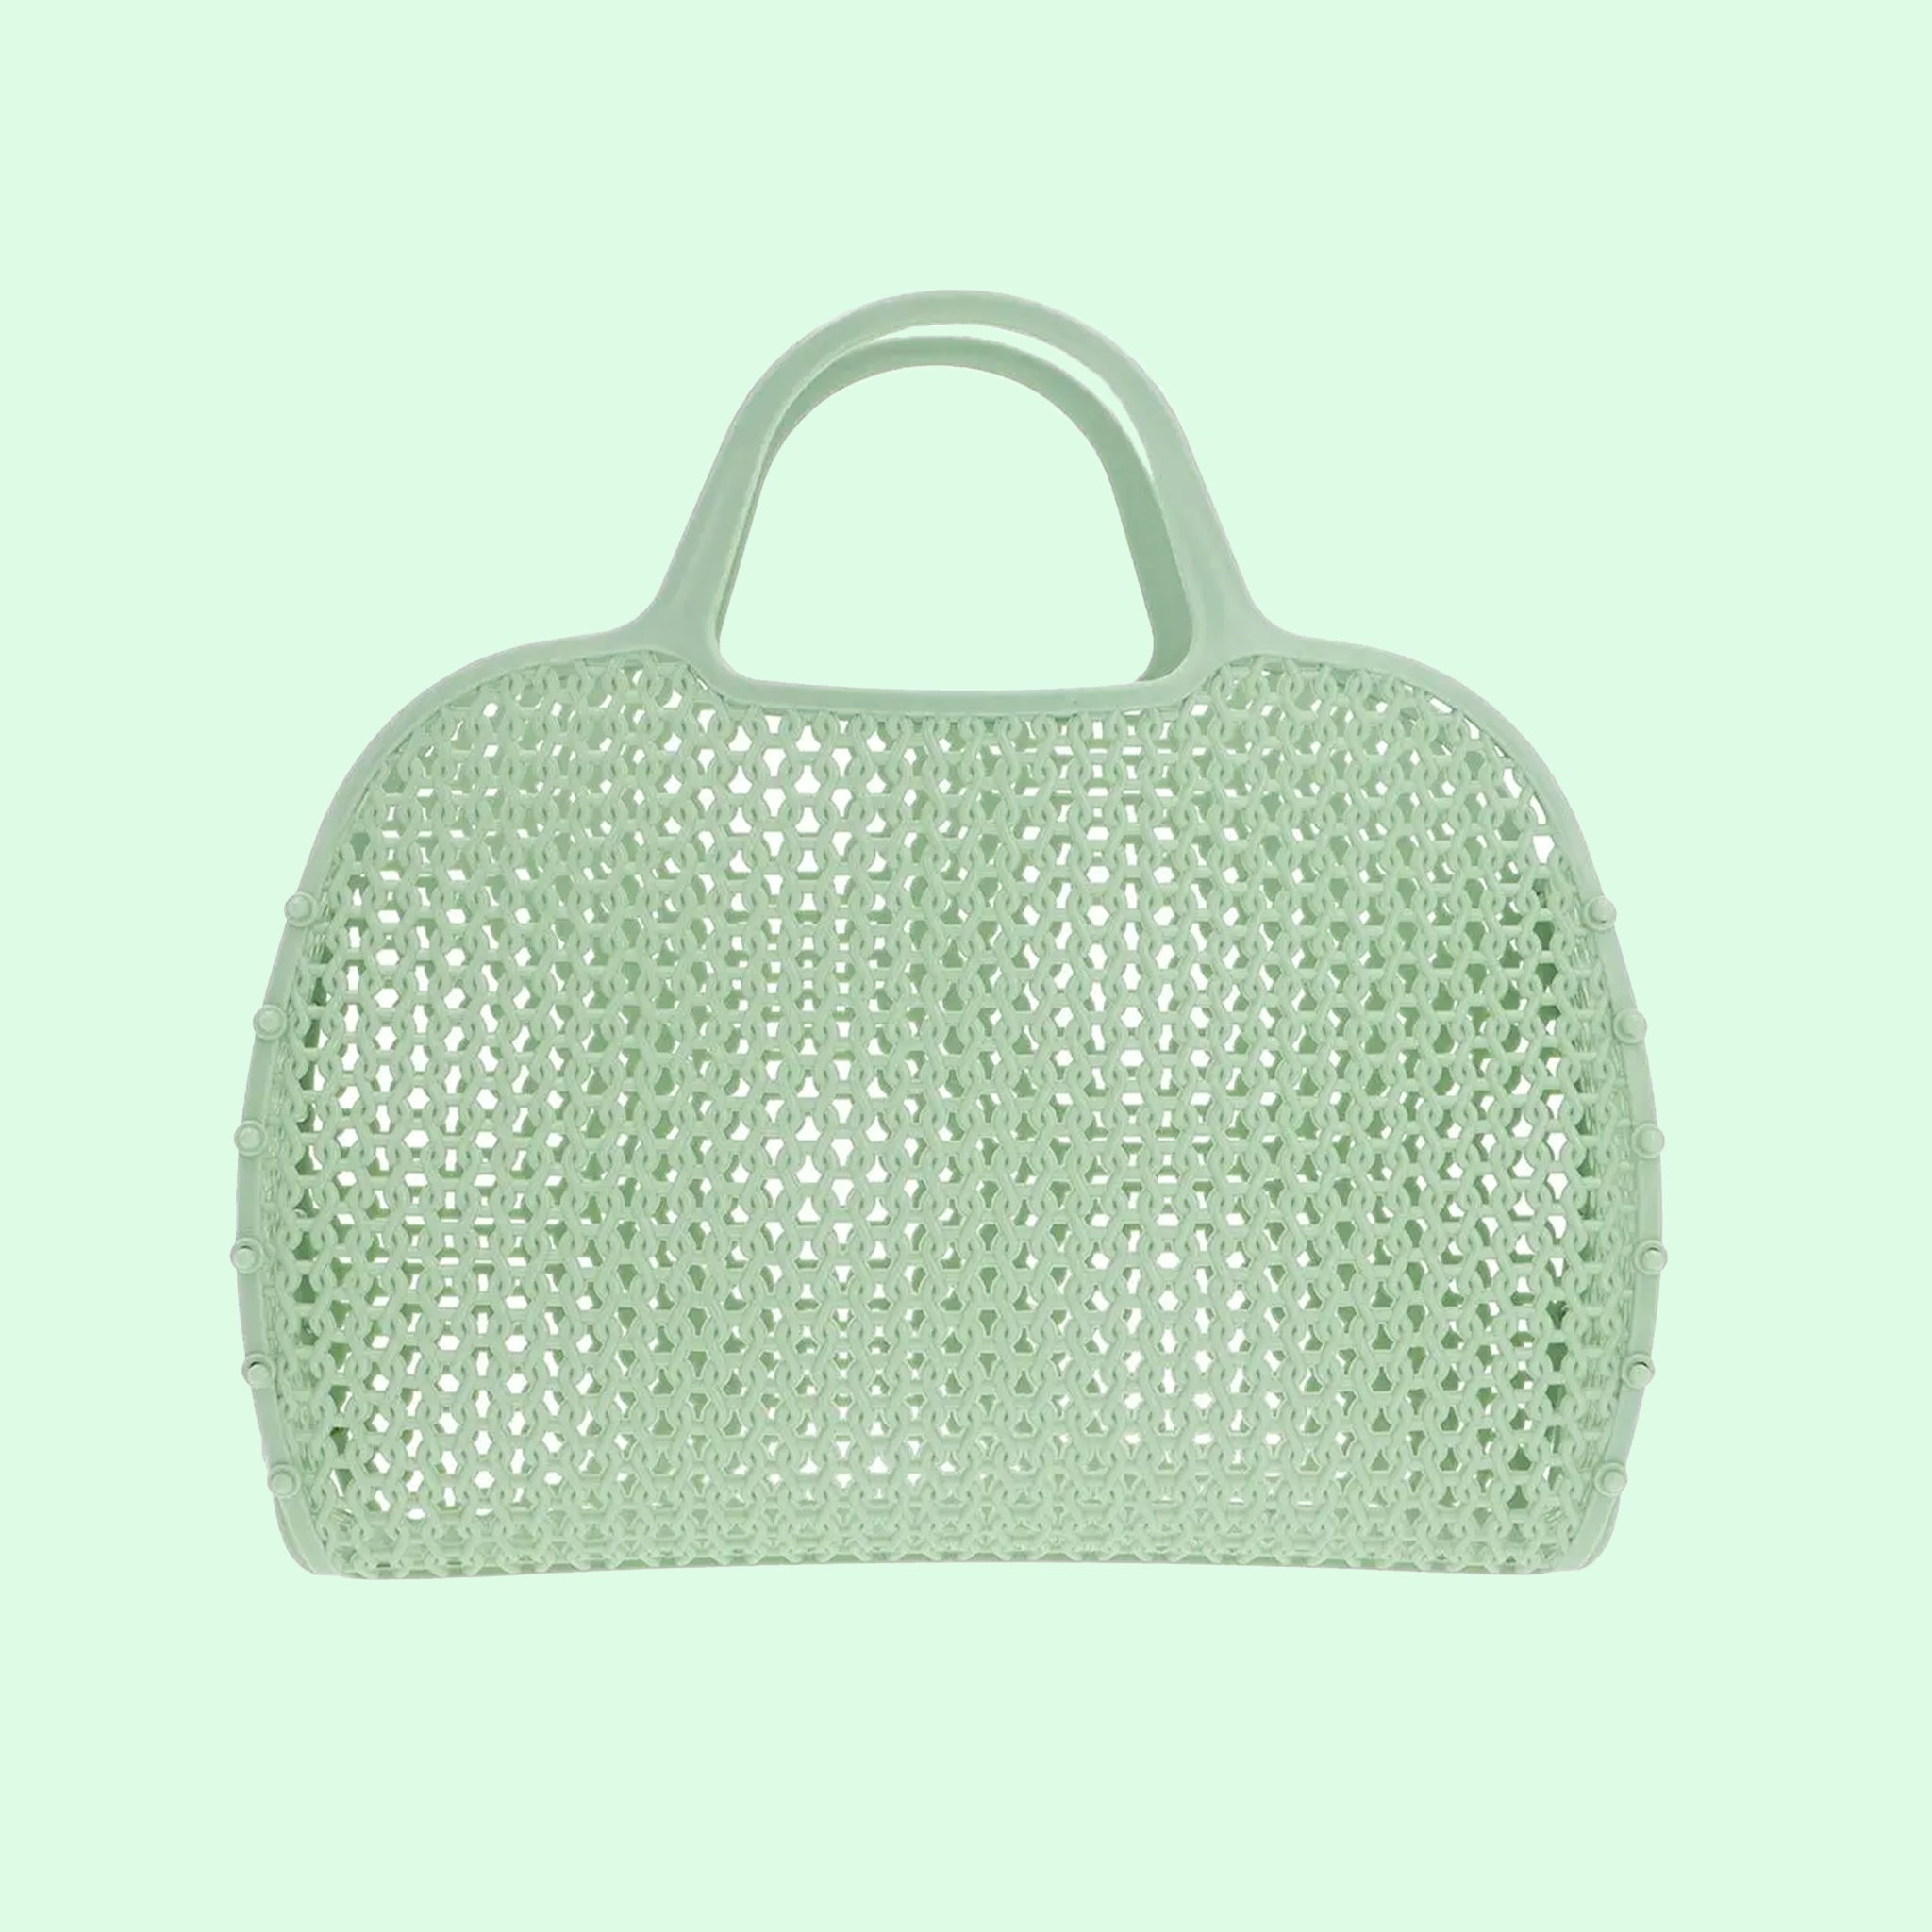 A plastic wicker style handbag with two handles. 